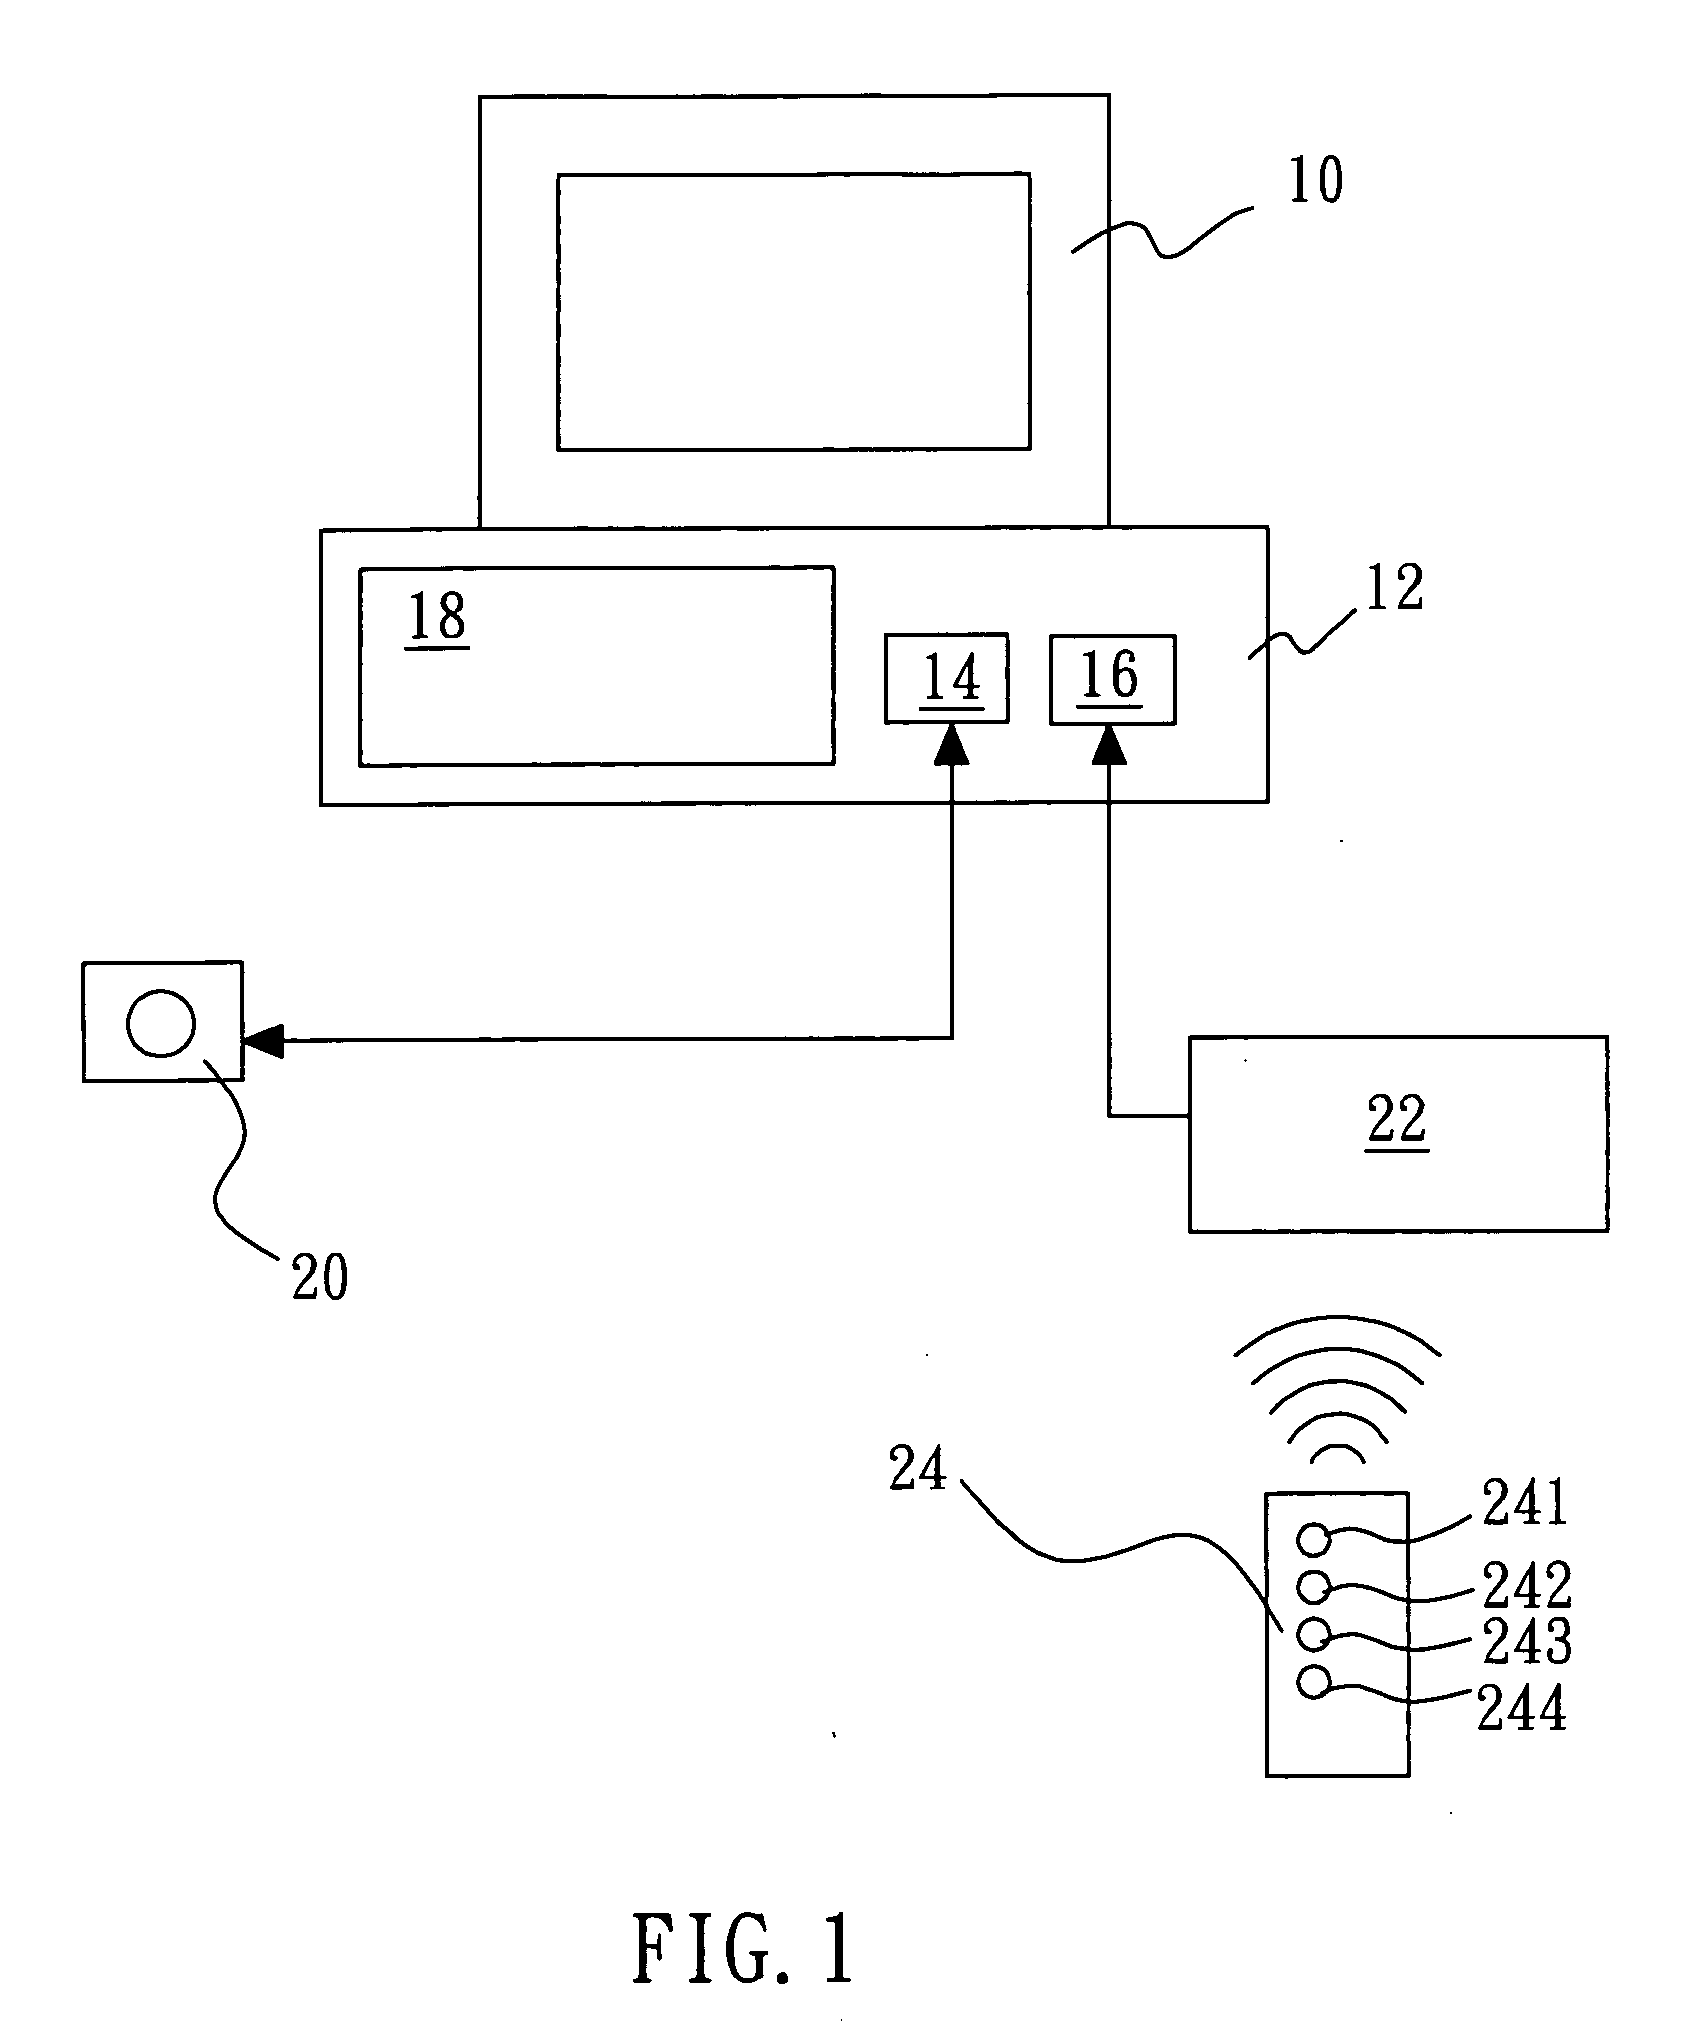 Method of remote controller via computer to indirectly control image-generating apparatus